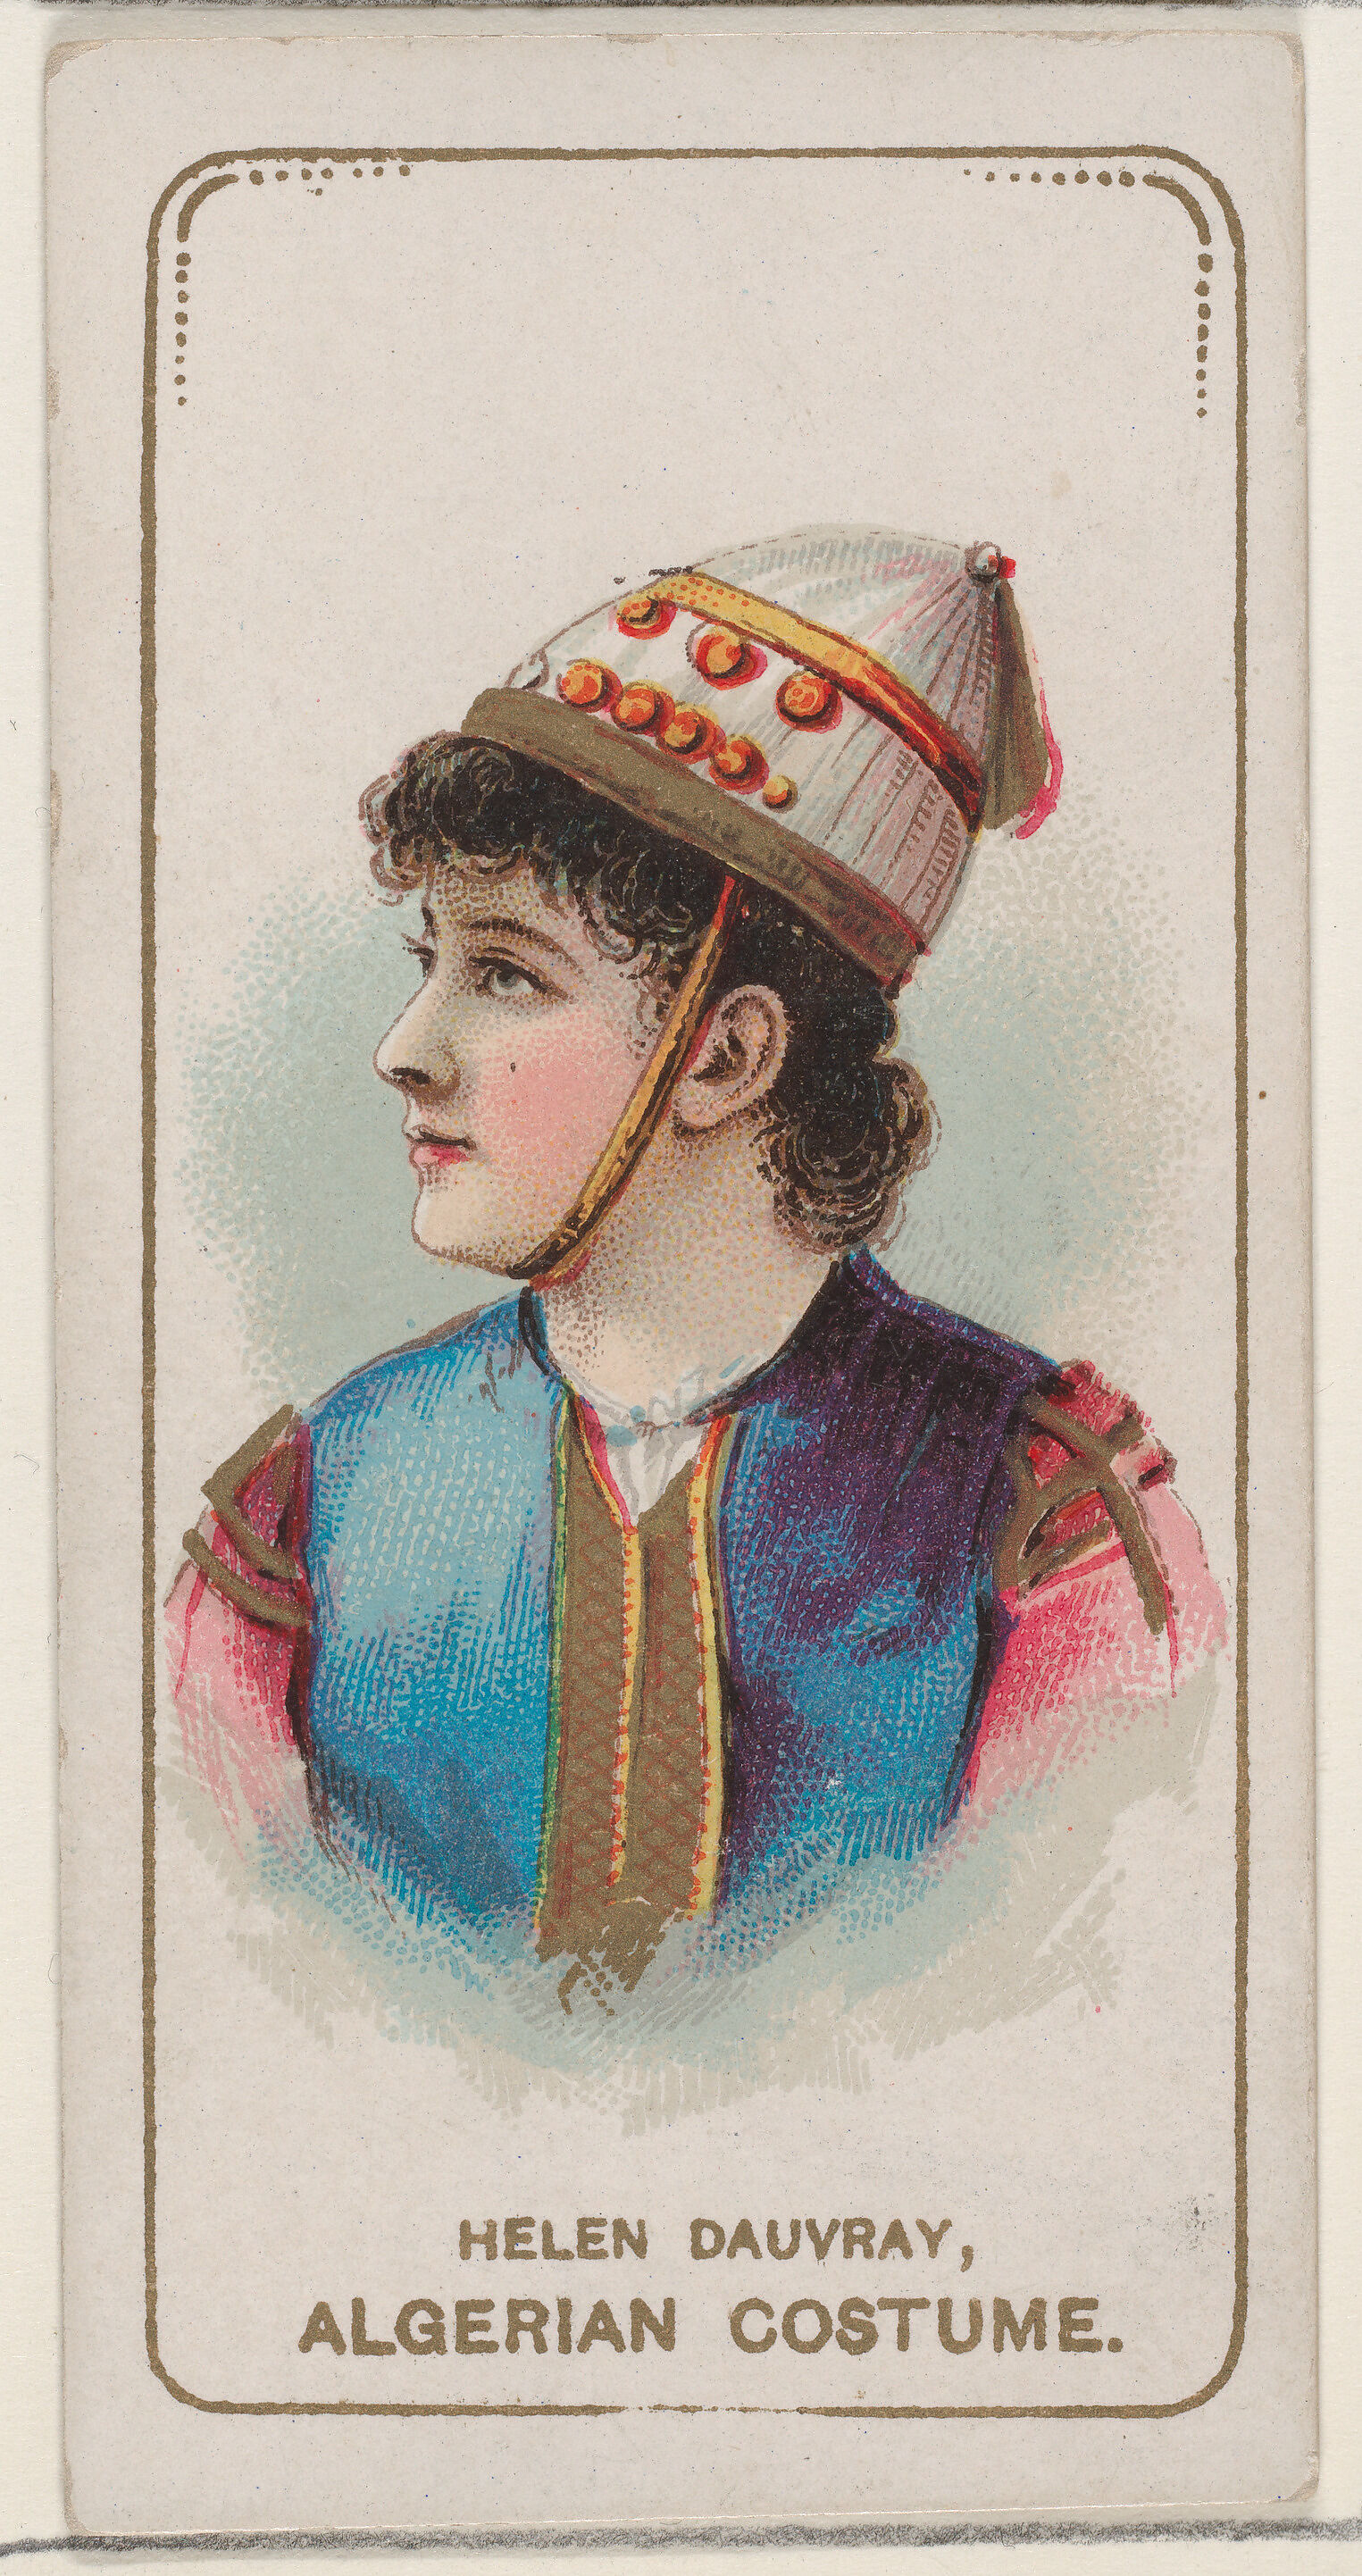 Helen Dauvray in Algerian Costume, from the set Actors and Actresses, Second Series (N71) for Duke brand cigarettes, Issued by W. Duke, Sons &amp; Co. (New York and Durham, N.C.), Commercial color lithograph 